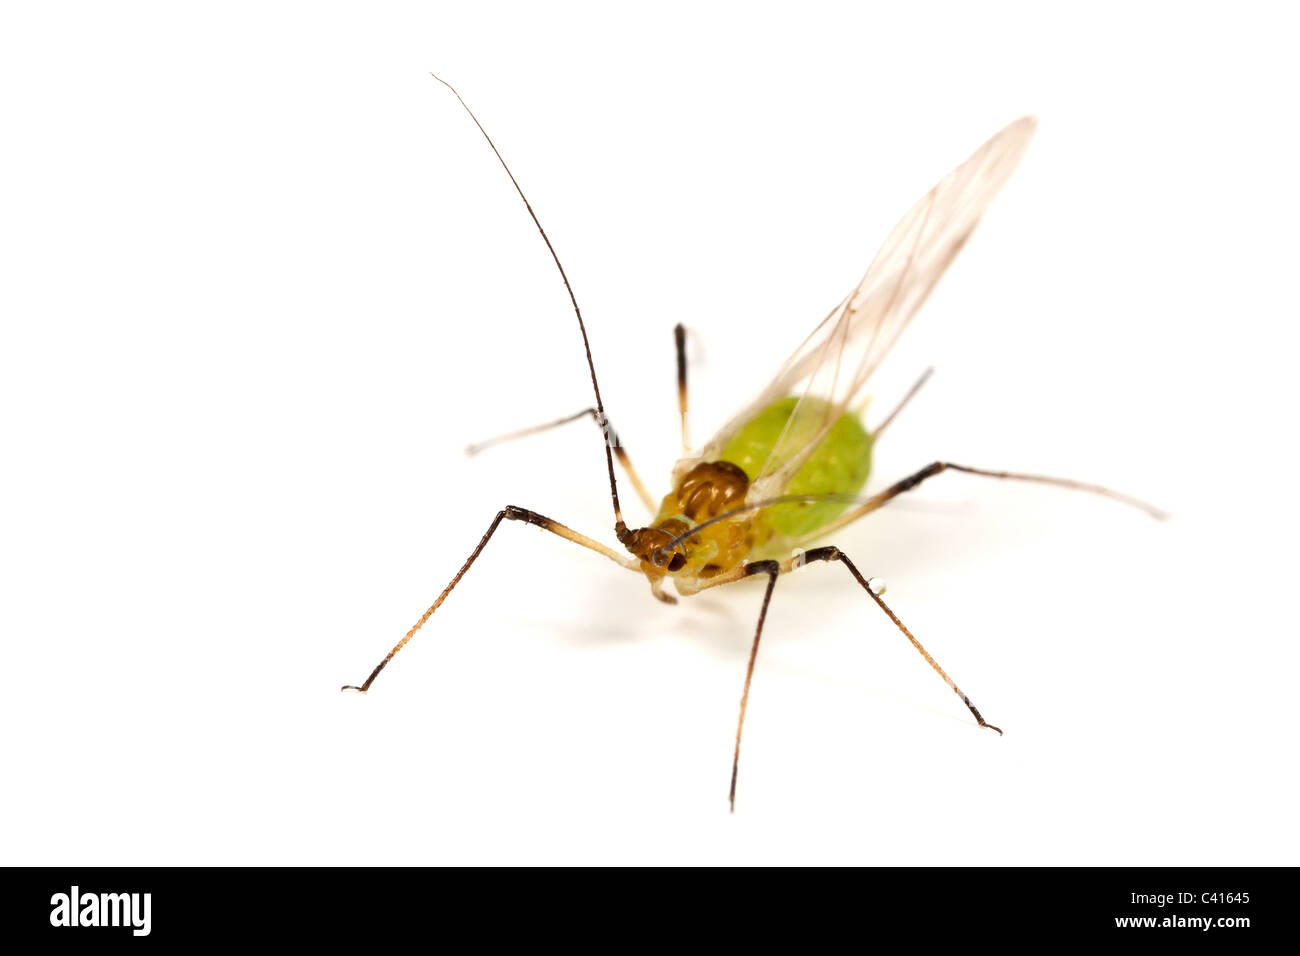 An aphid - winged form - on a white background Stock Photo